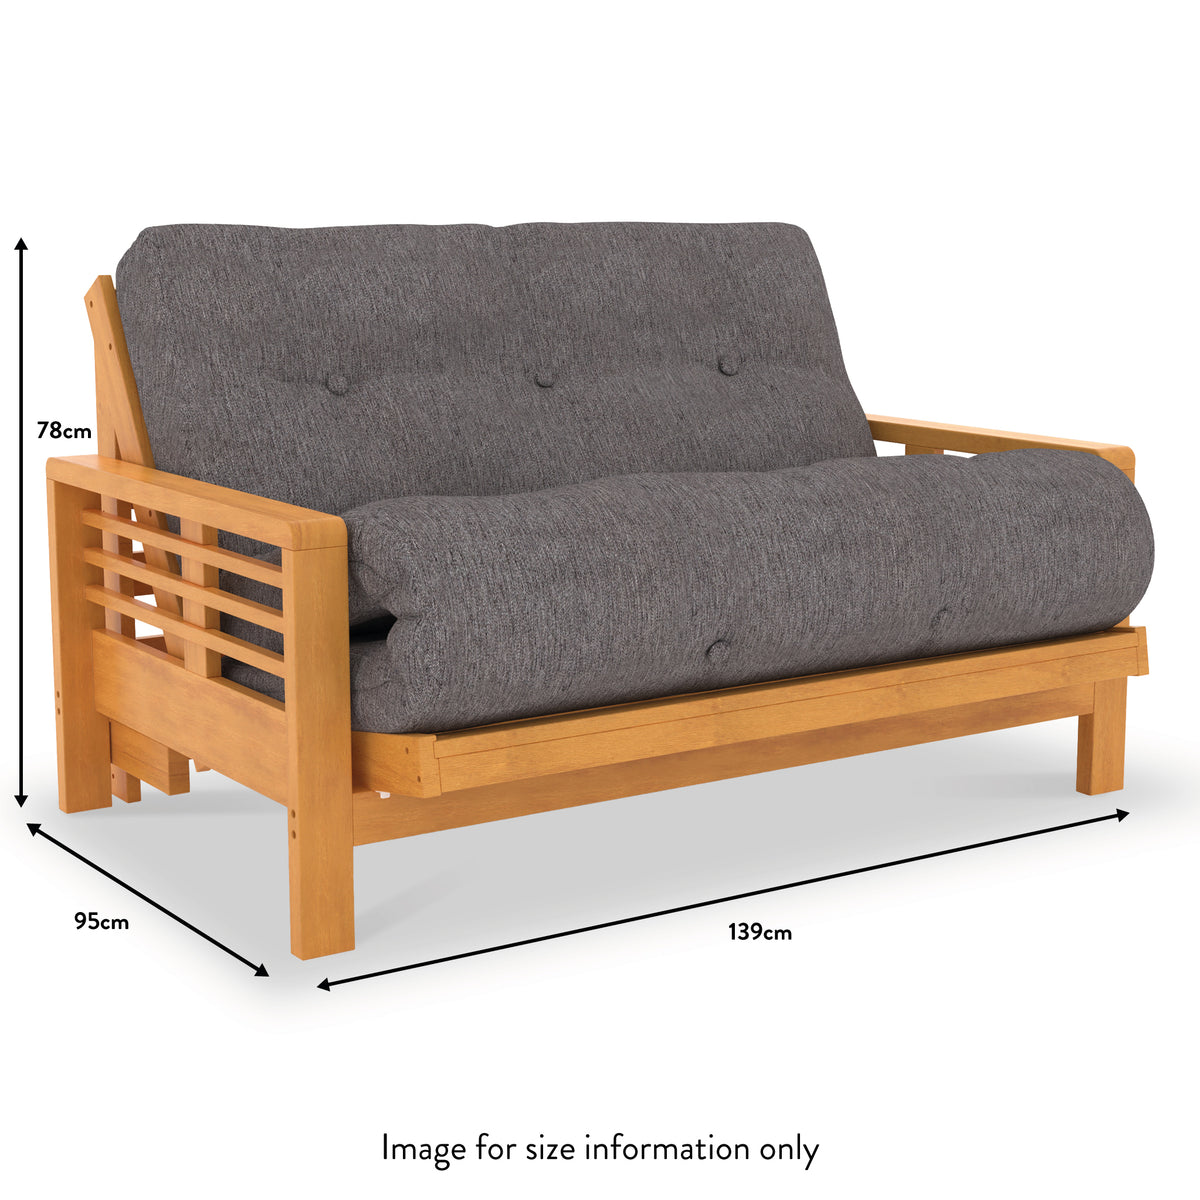 Bristow Small Double Futon Sofabed dimensions